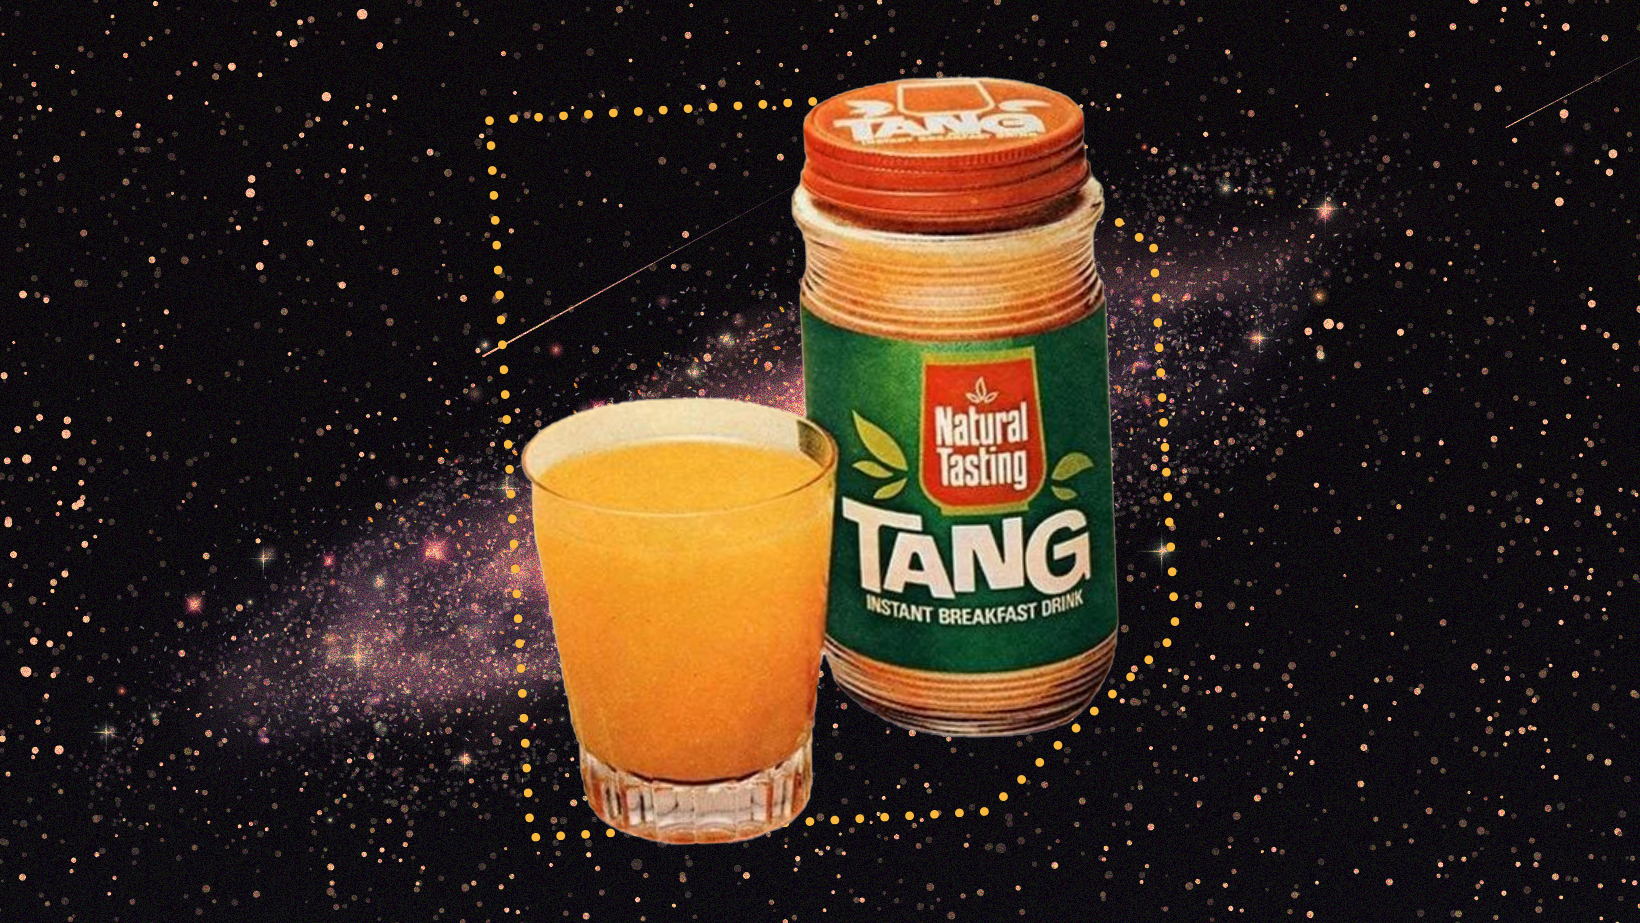 Tang Isn't Just Ideal For Space; It's Powdered Form Is More Earth-Friendly  Too